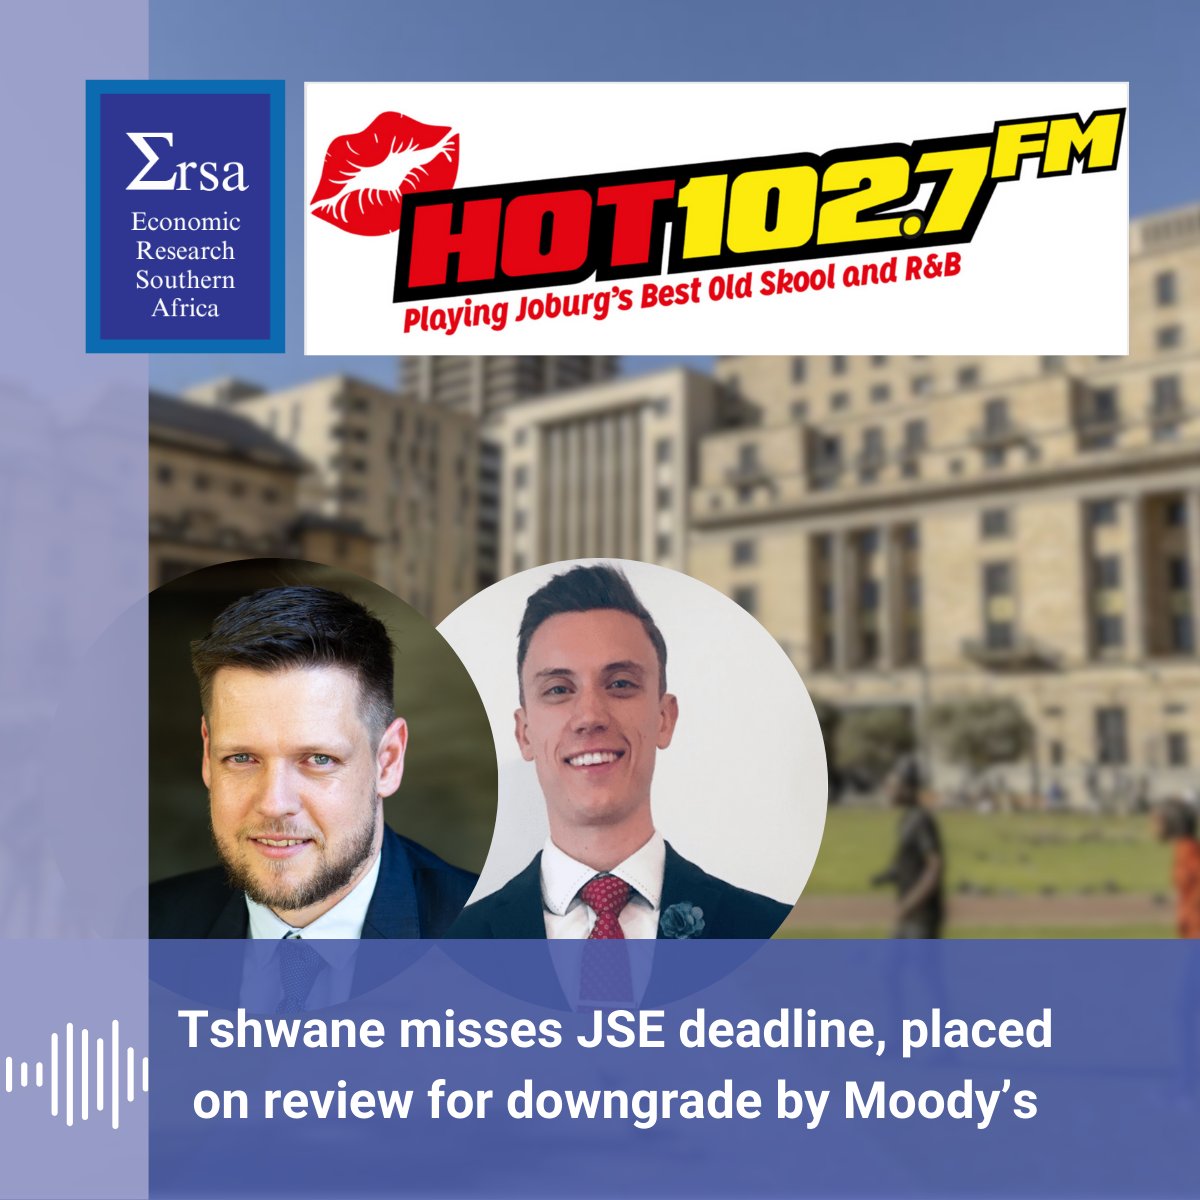 Today at 6pm on HOT102.7FM Business Powered by Moneyweb with Nicolette Mashile, ERSA's @FoucheVenter and Bradley Kent will discuss why it is that municipalities' ratings can increase the risk of the metro's financial decline. Tune in at 6pm: hot1027.co.za #MOODYS